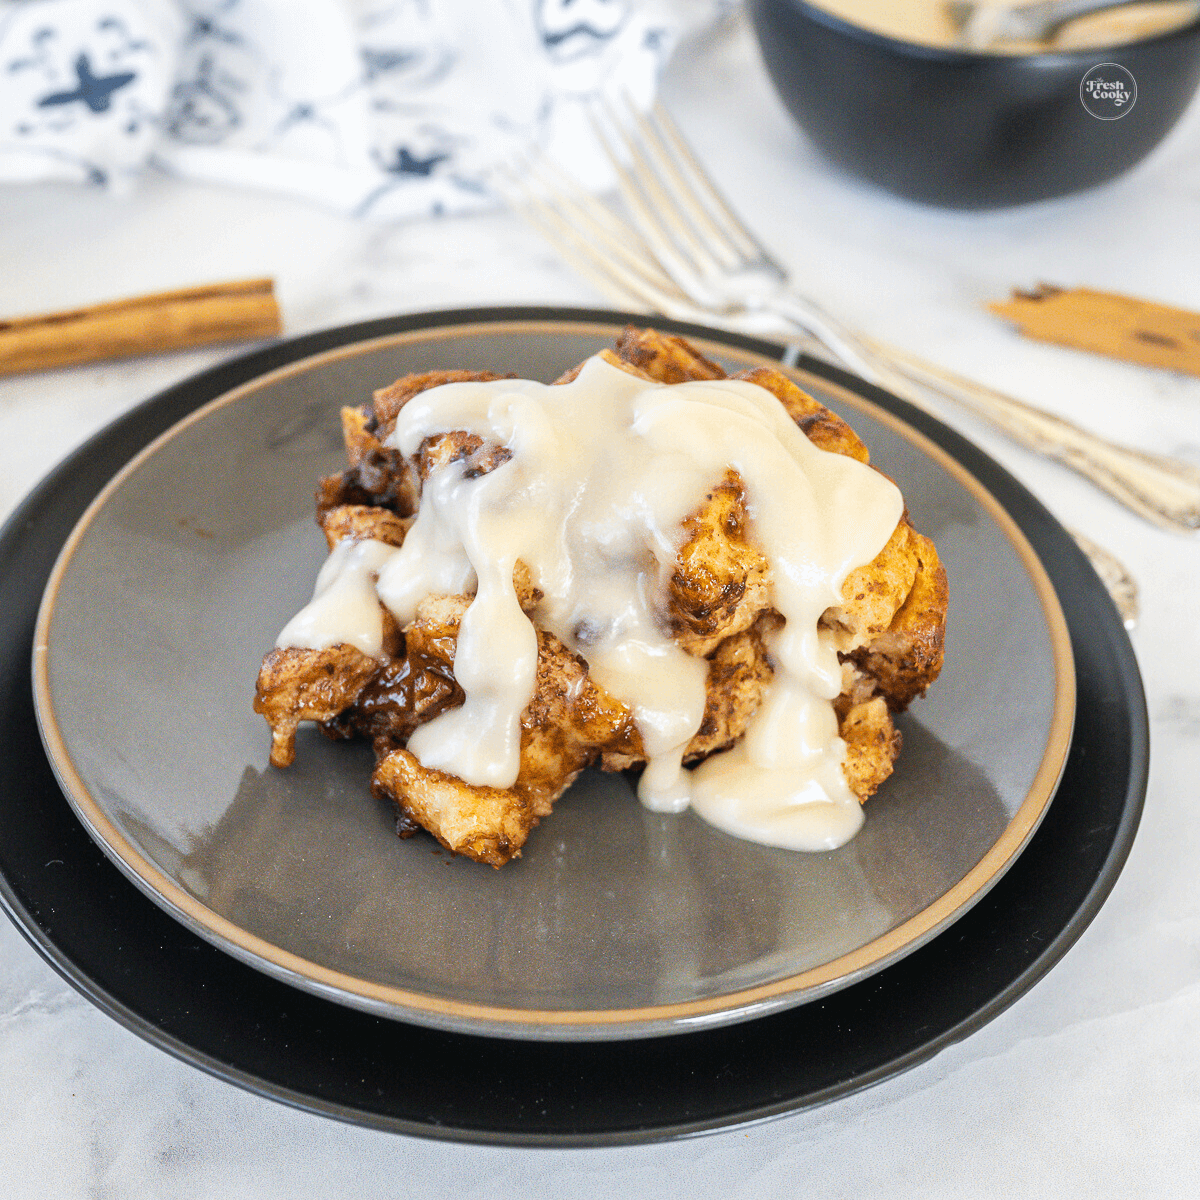 Crock pot cinnamon roll casserole serving on a plate drizzled with creamy cream cheese frosting.